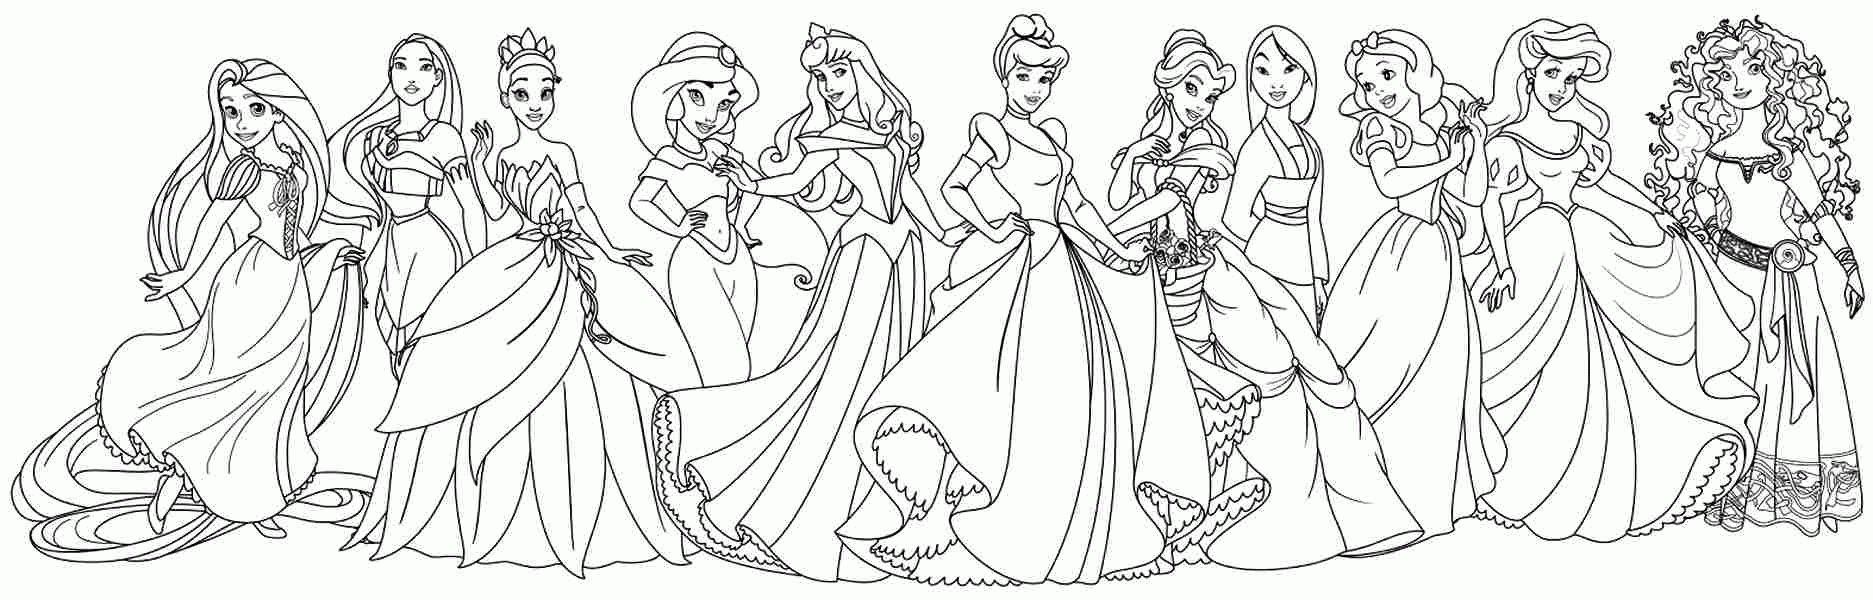 disney princess group coloring pages   Clip Art Library